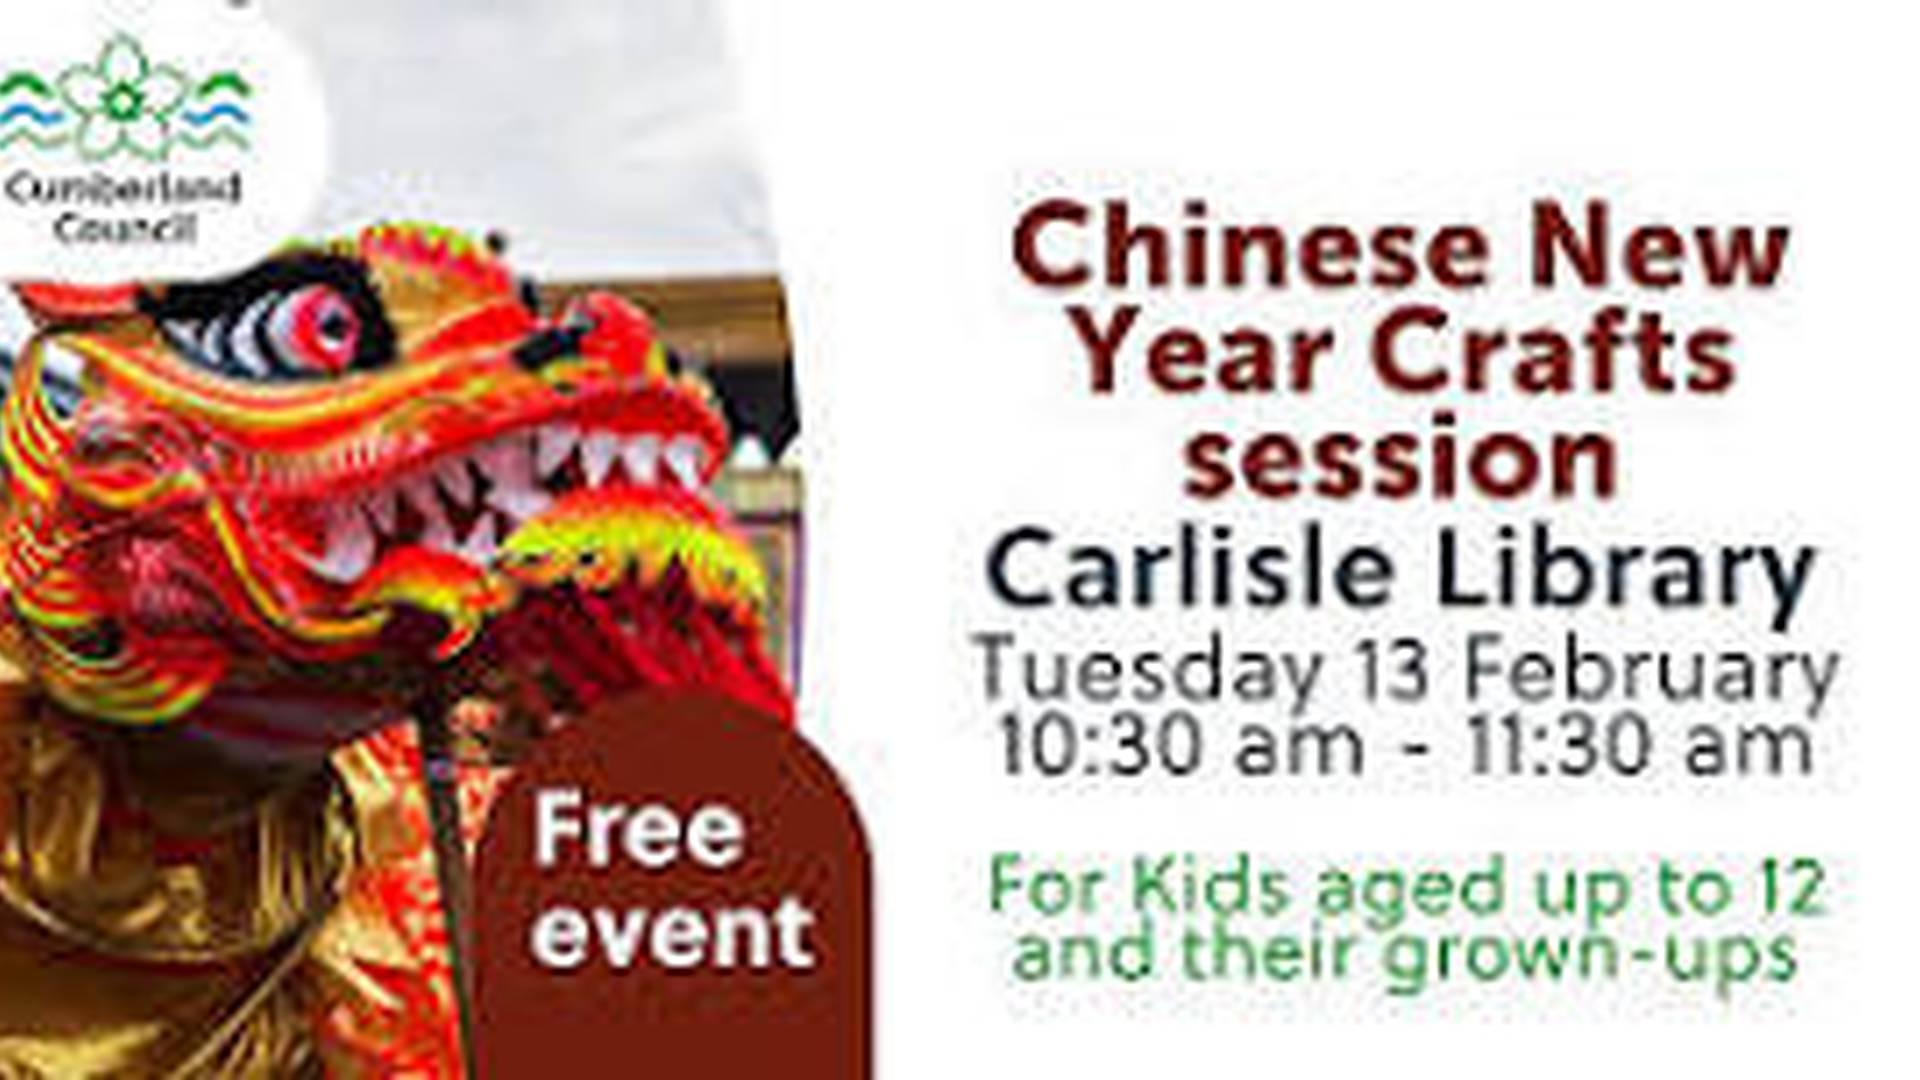 Chinese New Year Crafts Session at Carlisle Library photo